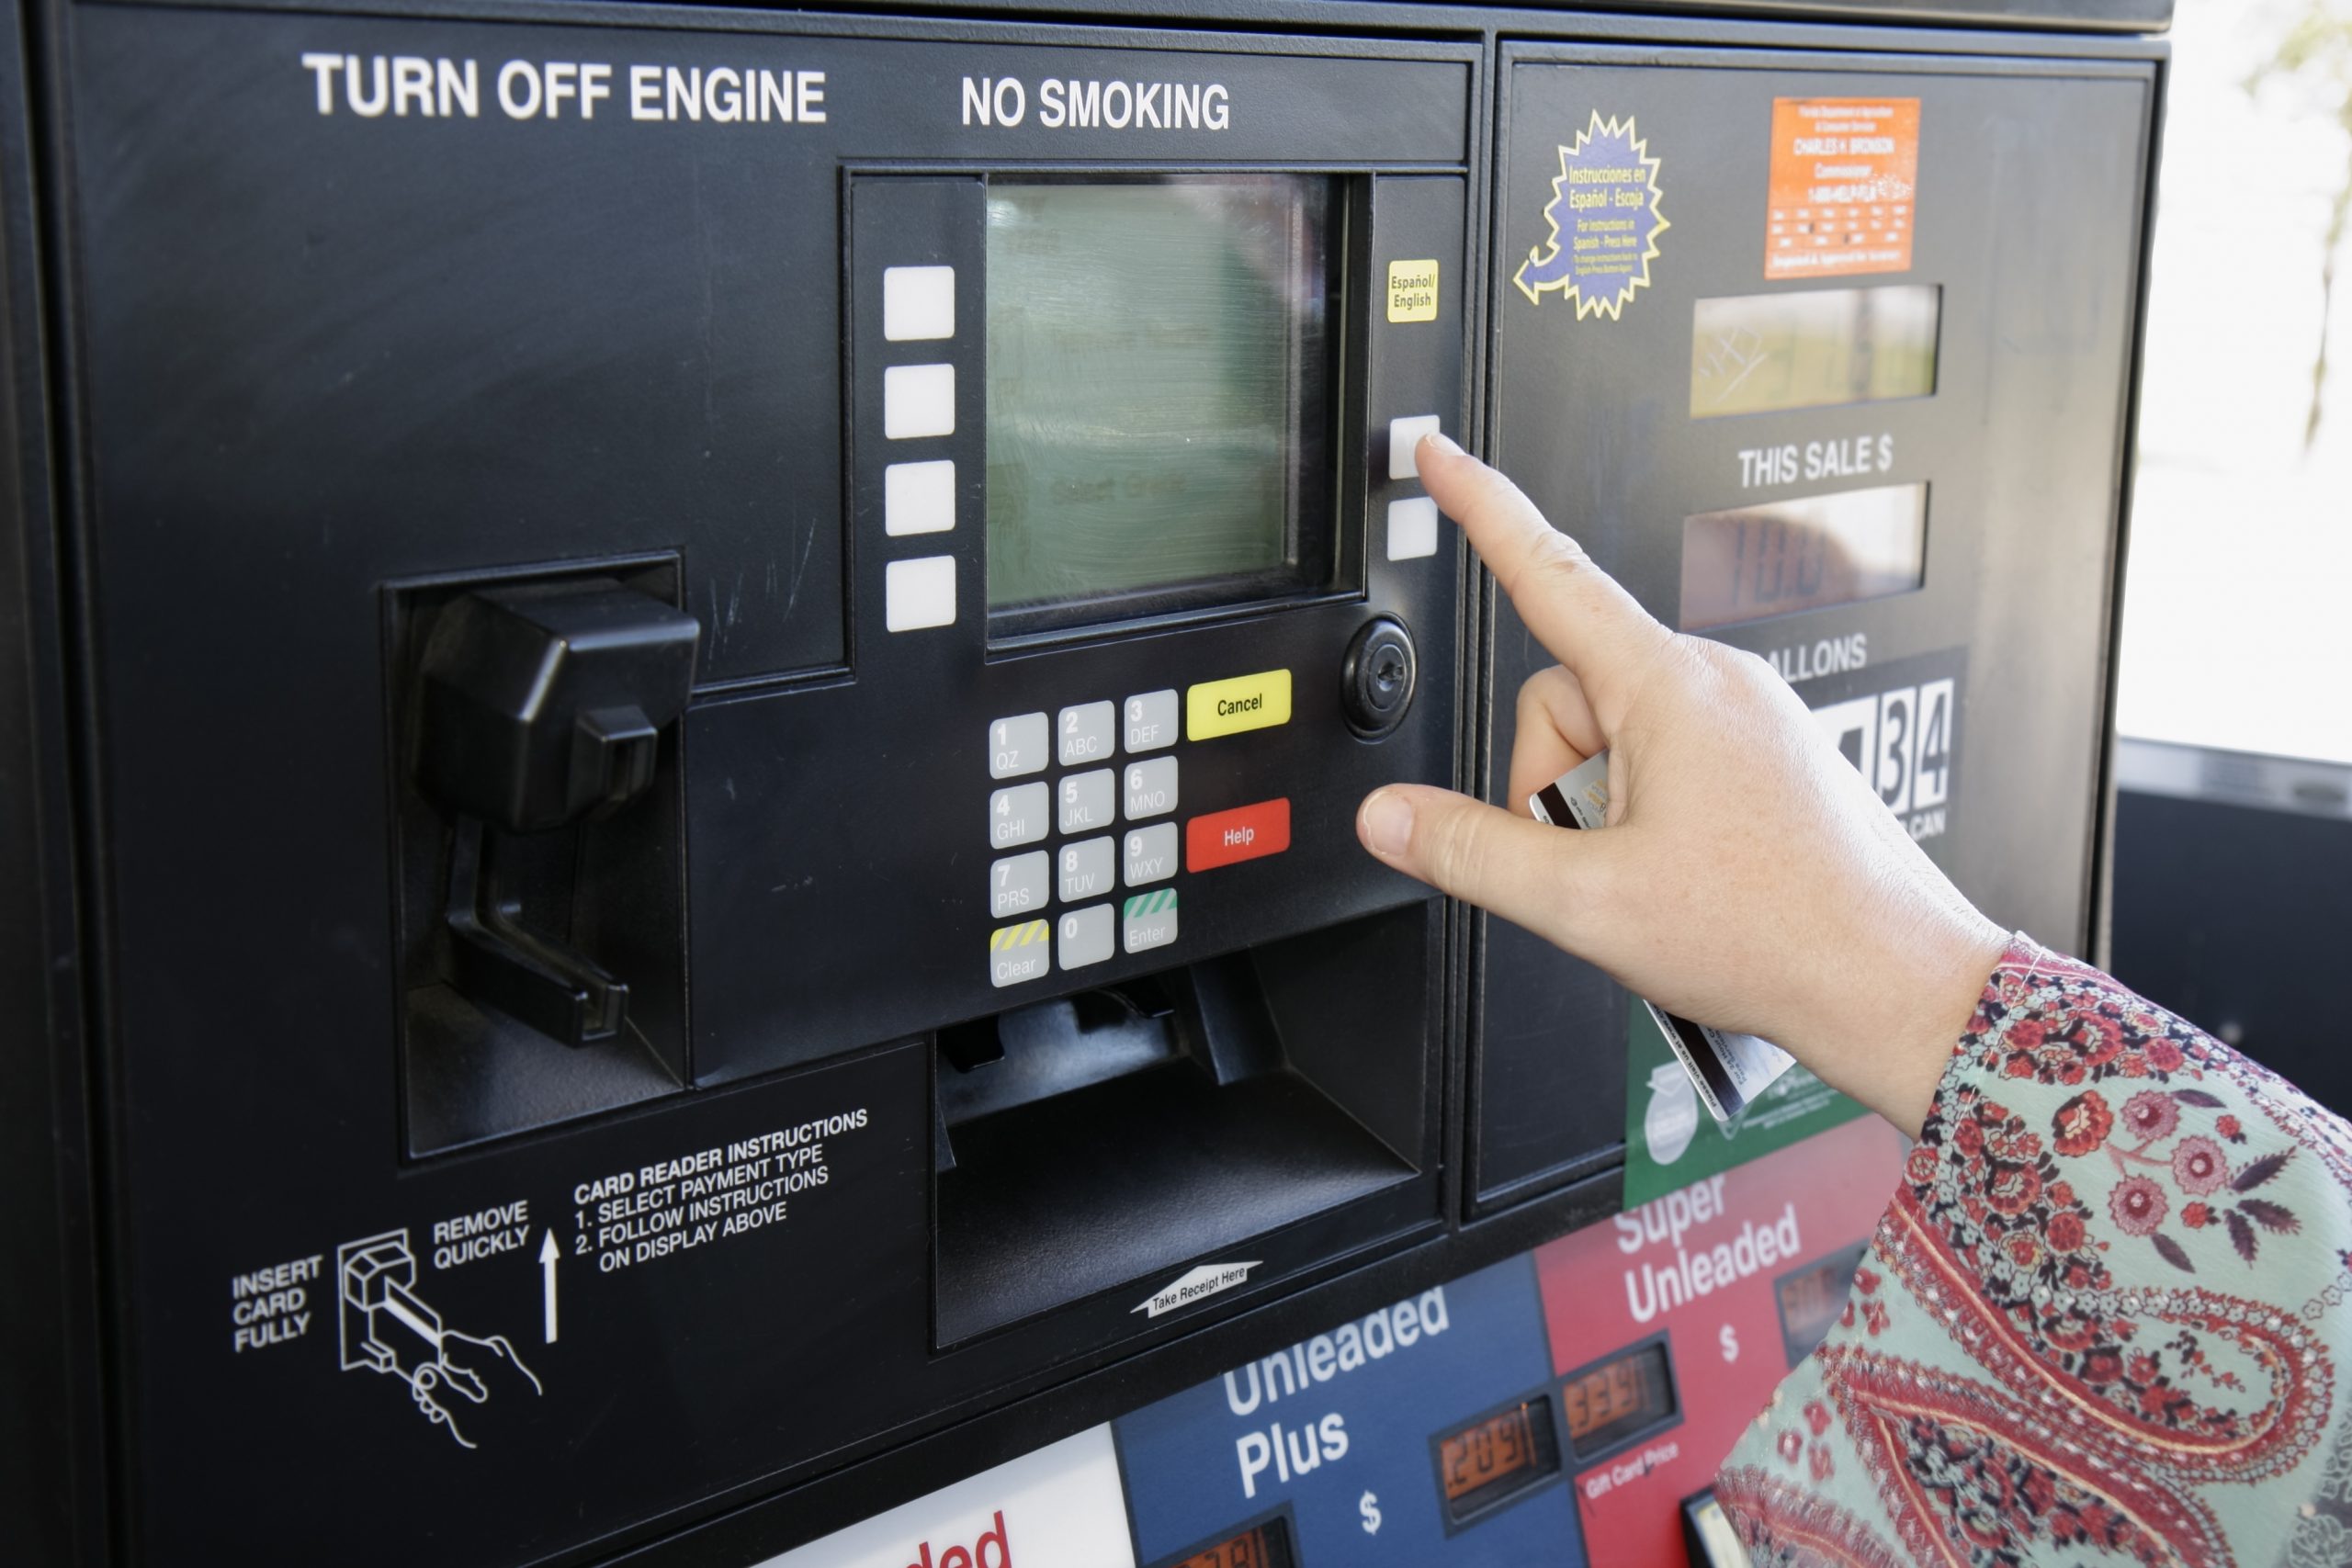 How Do You Tell if There Is a Card Skimmer on a Gas Pump?